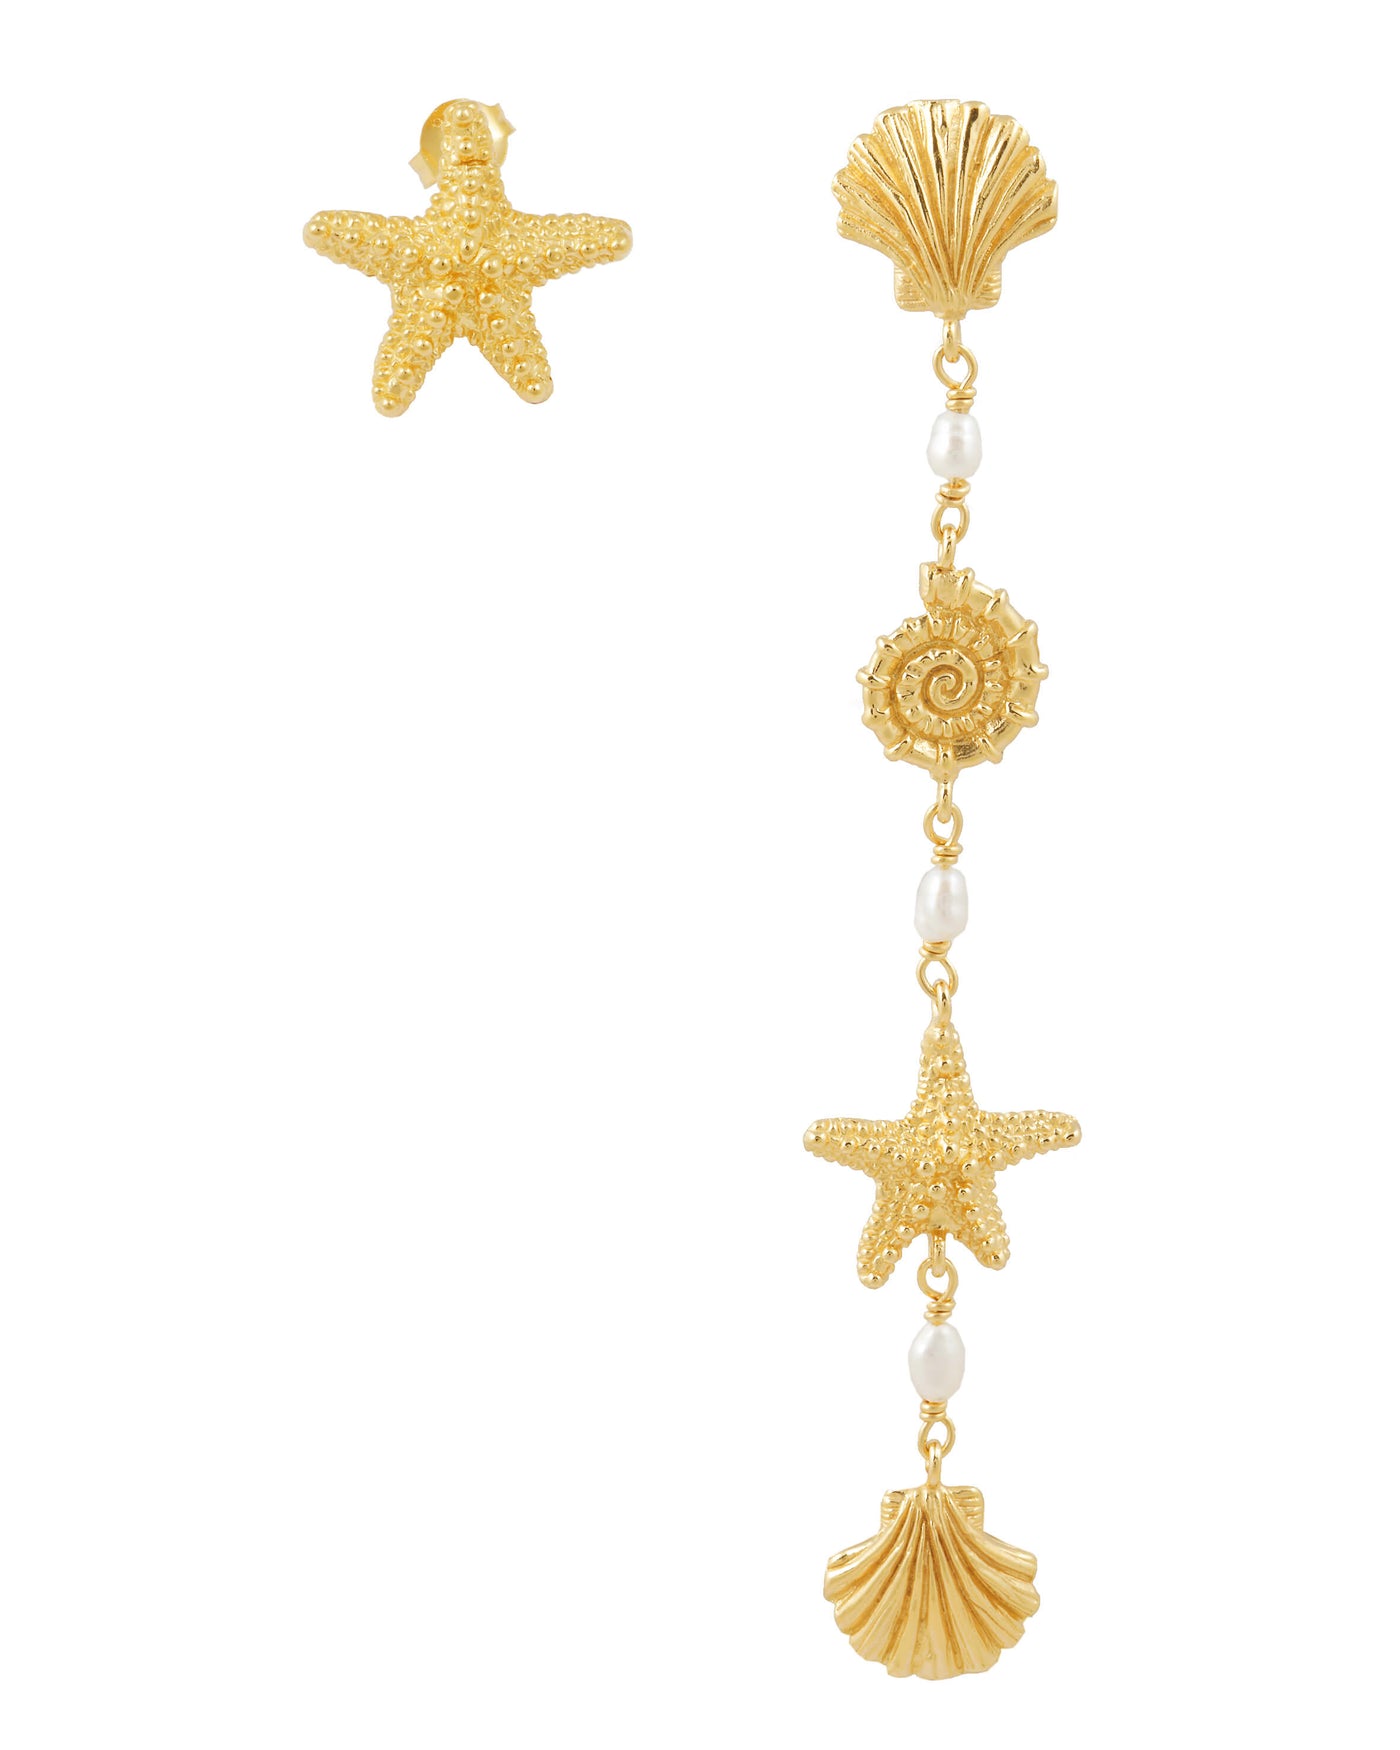 Sea star and shell with pearl asymmetric earrings. Silver, gold-plated